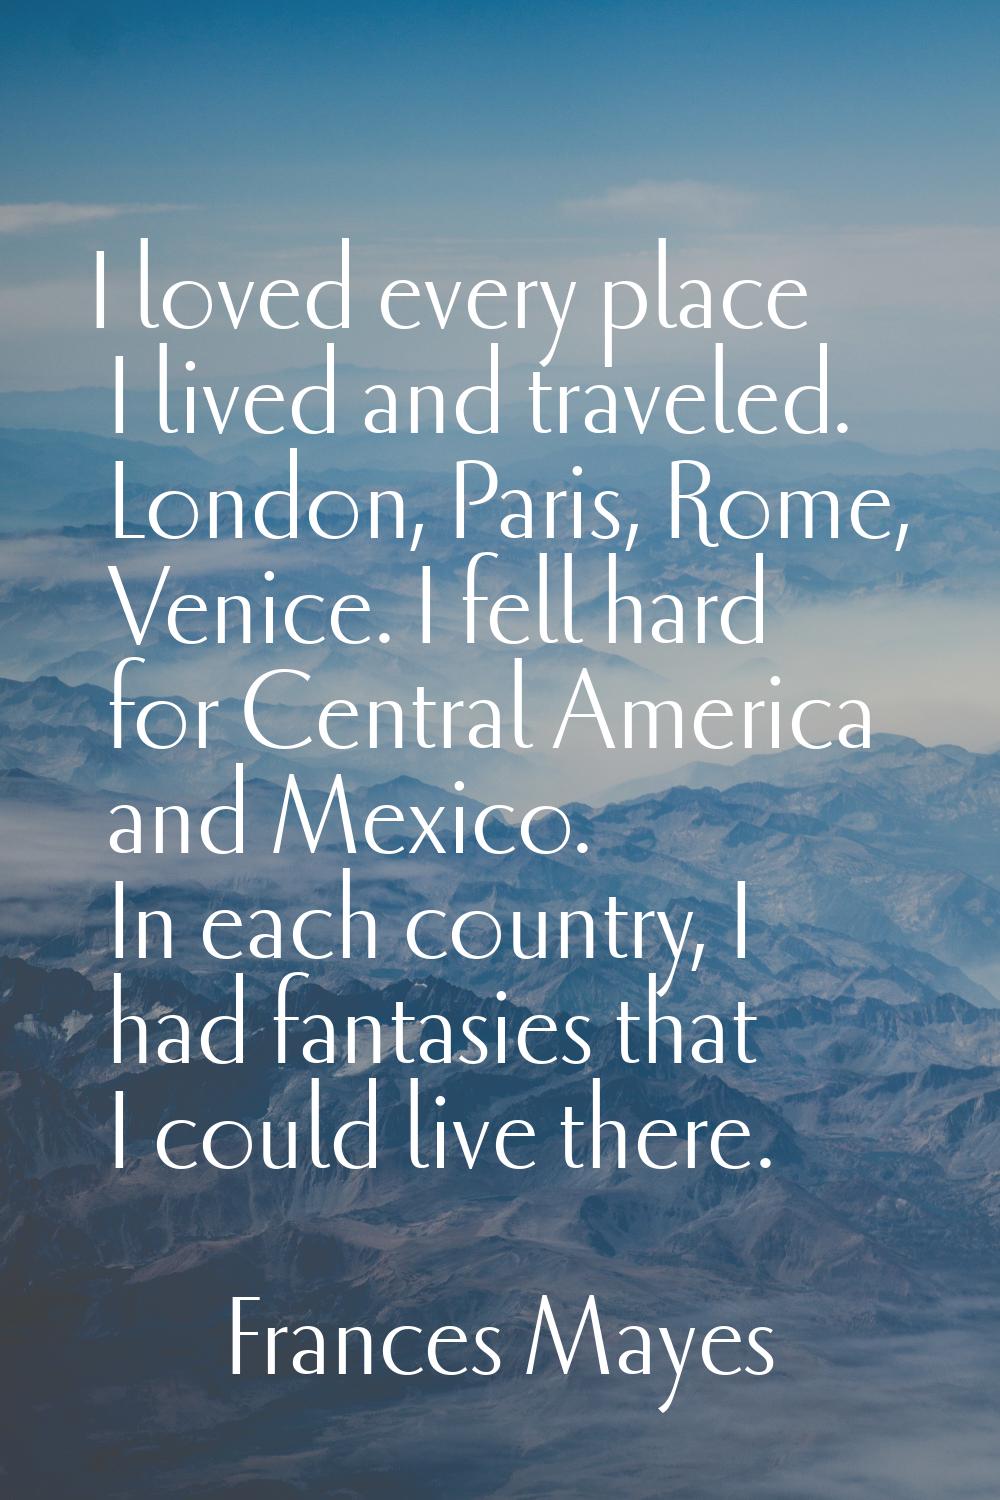 I loved every place I lived and traveled. London, Paris, Rome, Venice. I fell hard for Central Amer